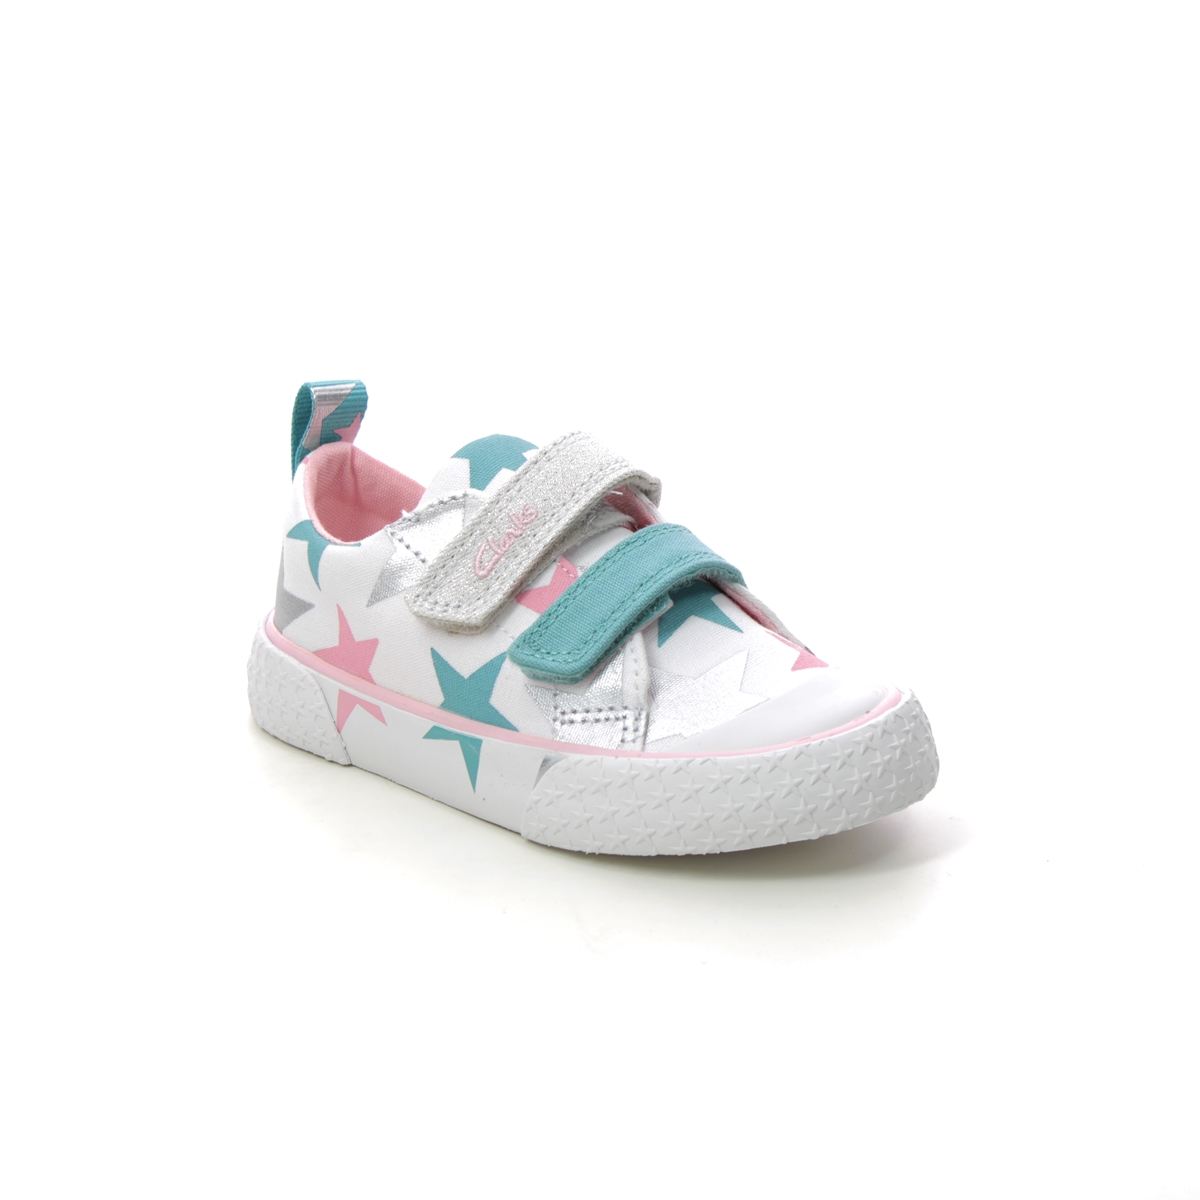 Clarks Foxing Lo T Cotton Kids toddler girls trainers 6476-06F in a Plain Canvas in Size 5.5